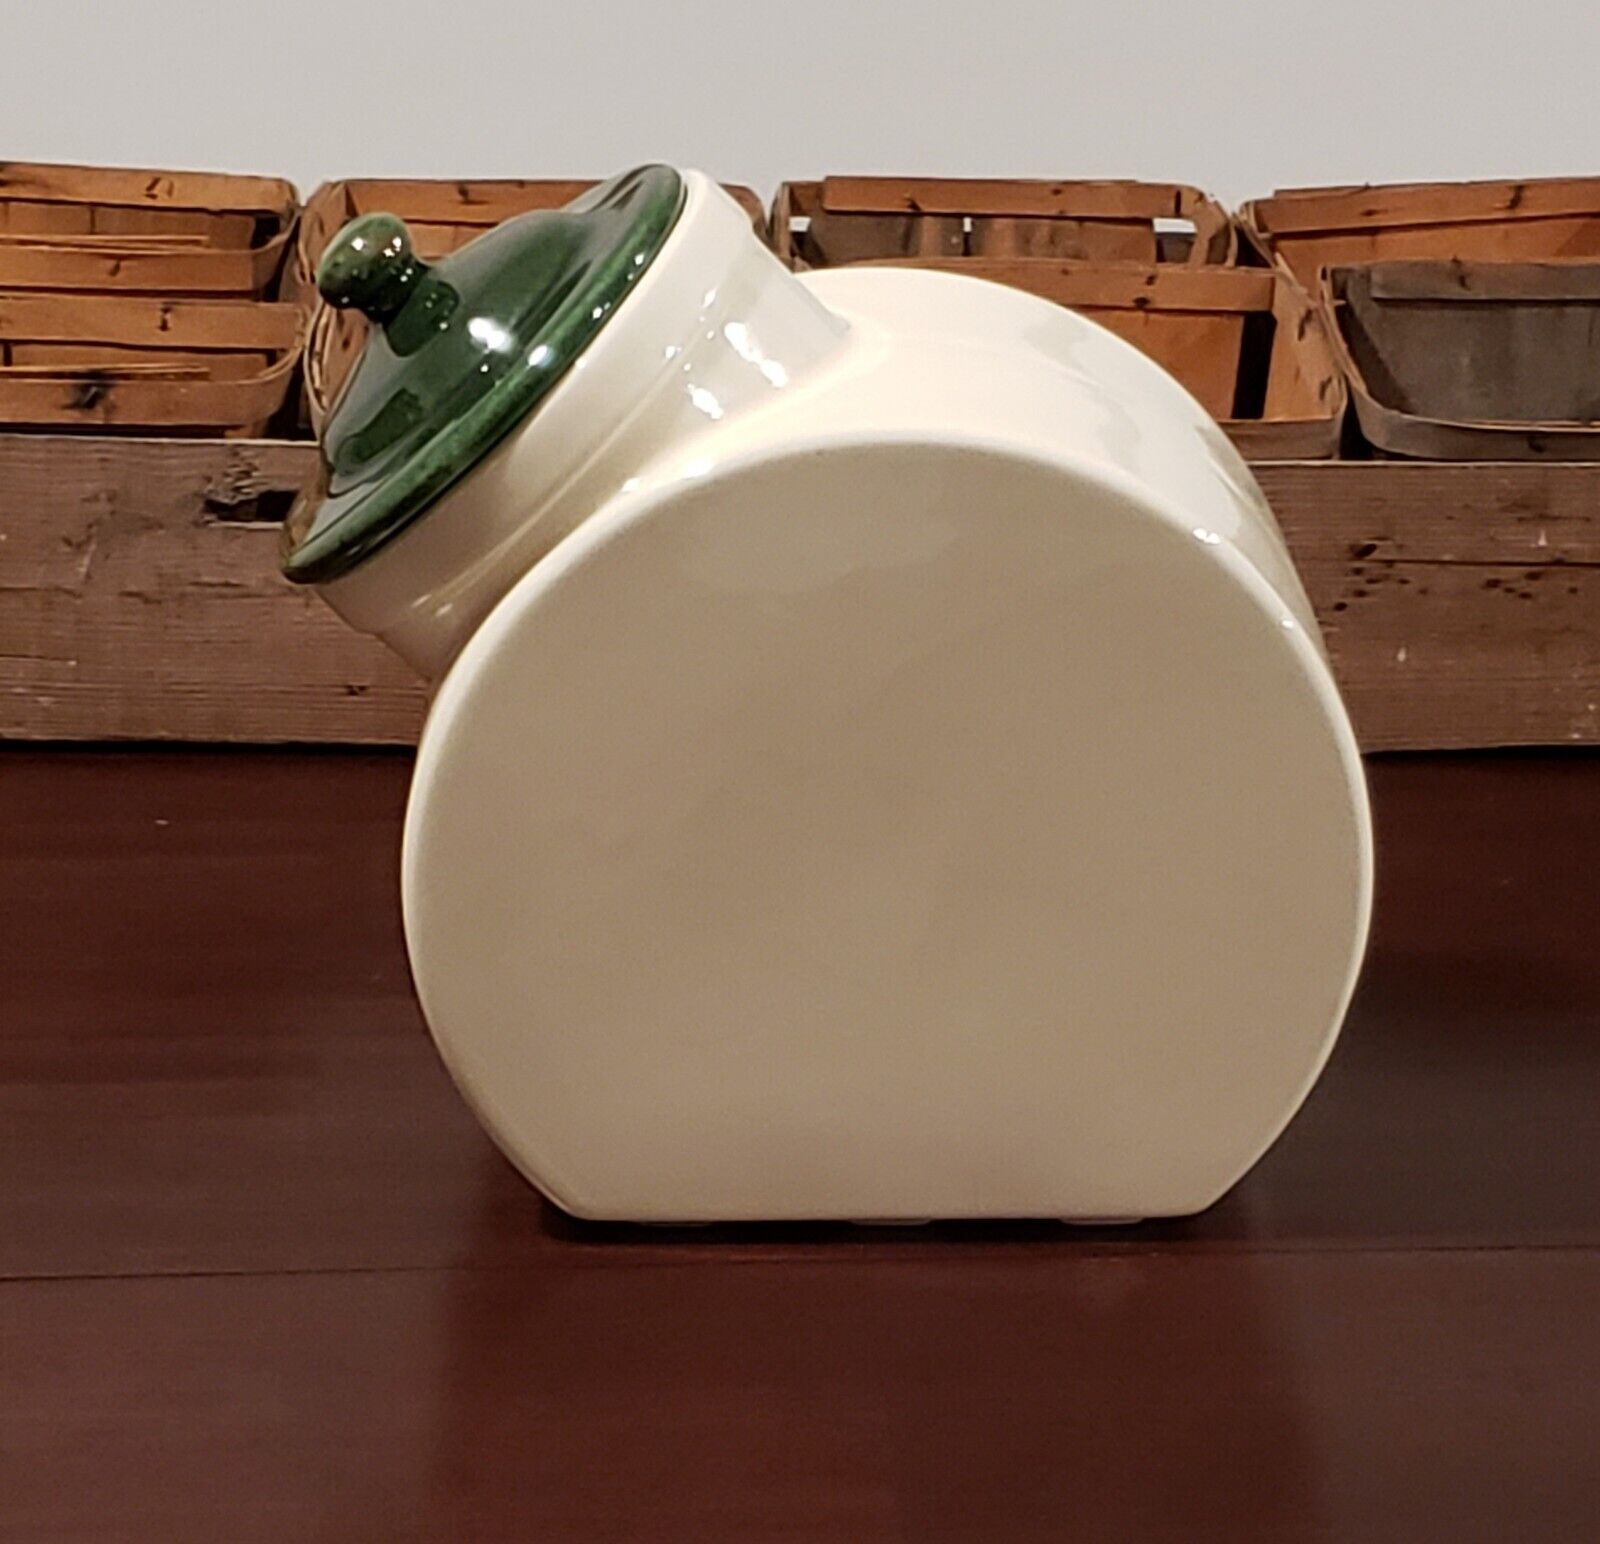 Vintage Creamy White Disc Shaped Heavy Container Canister with a Green Lid Jar